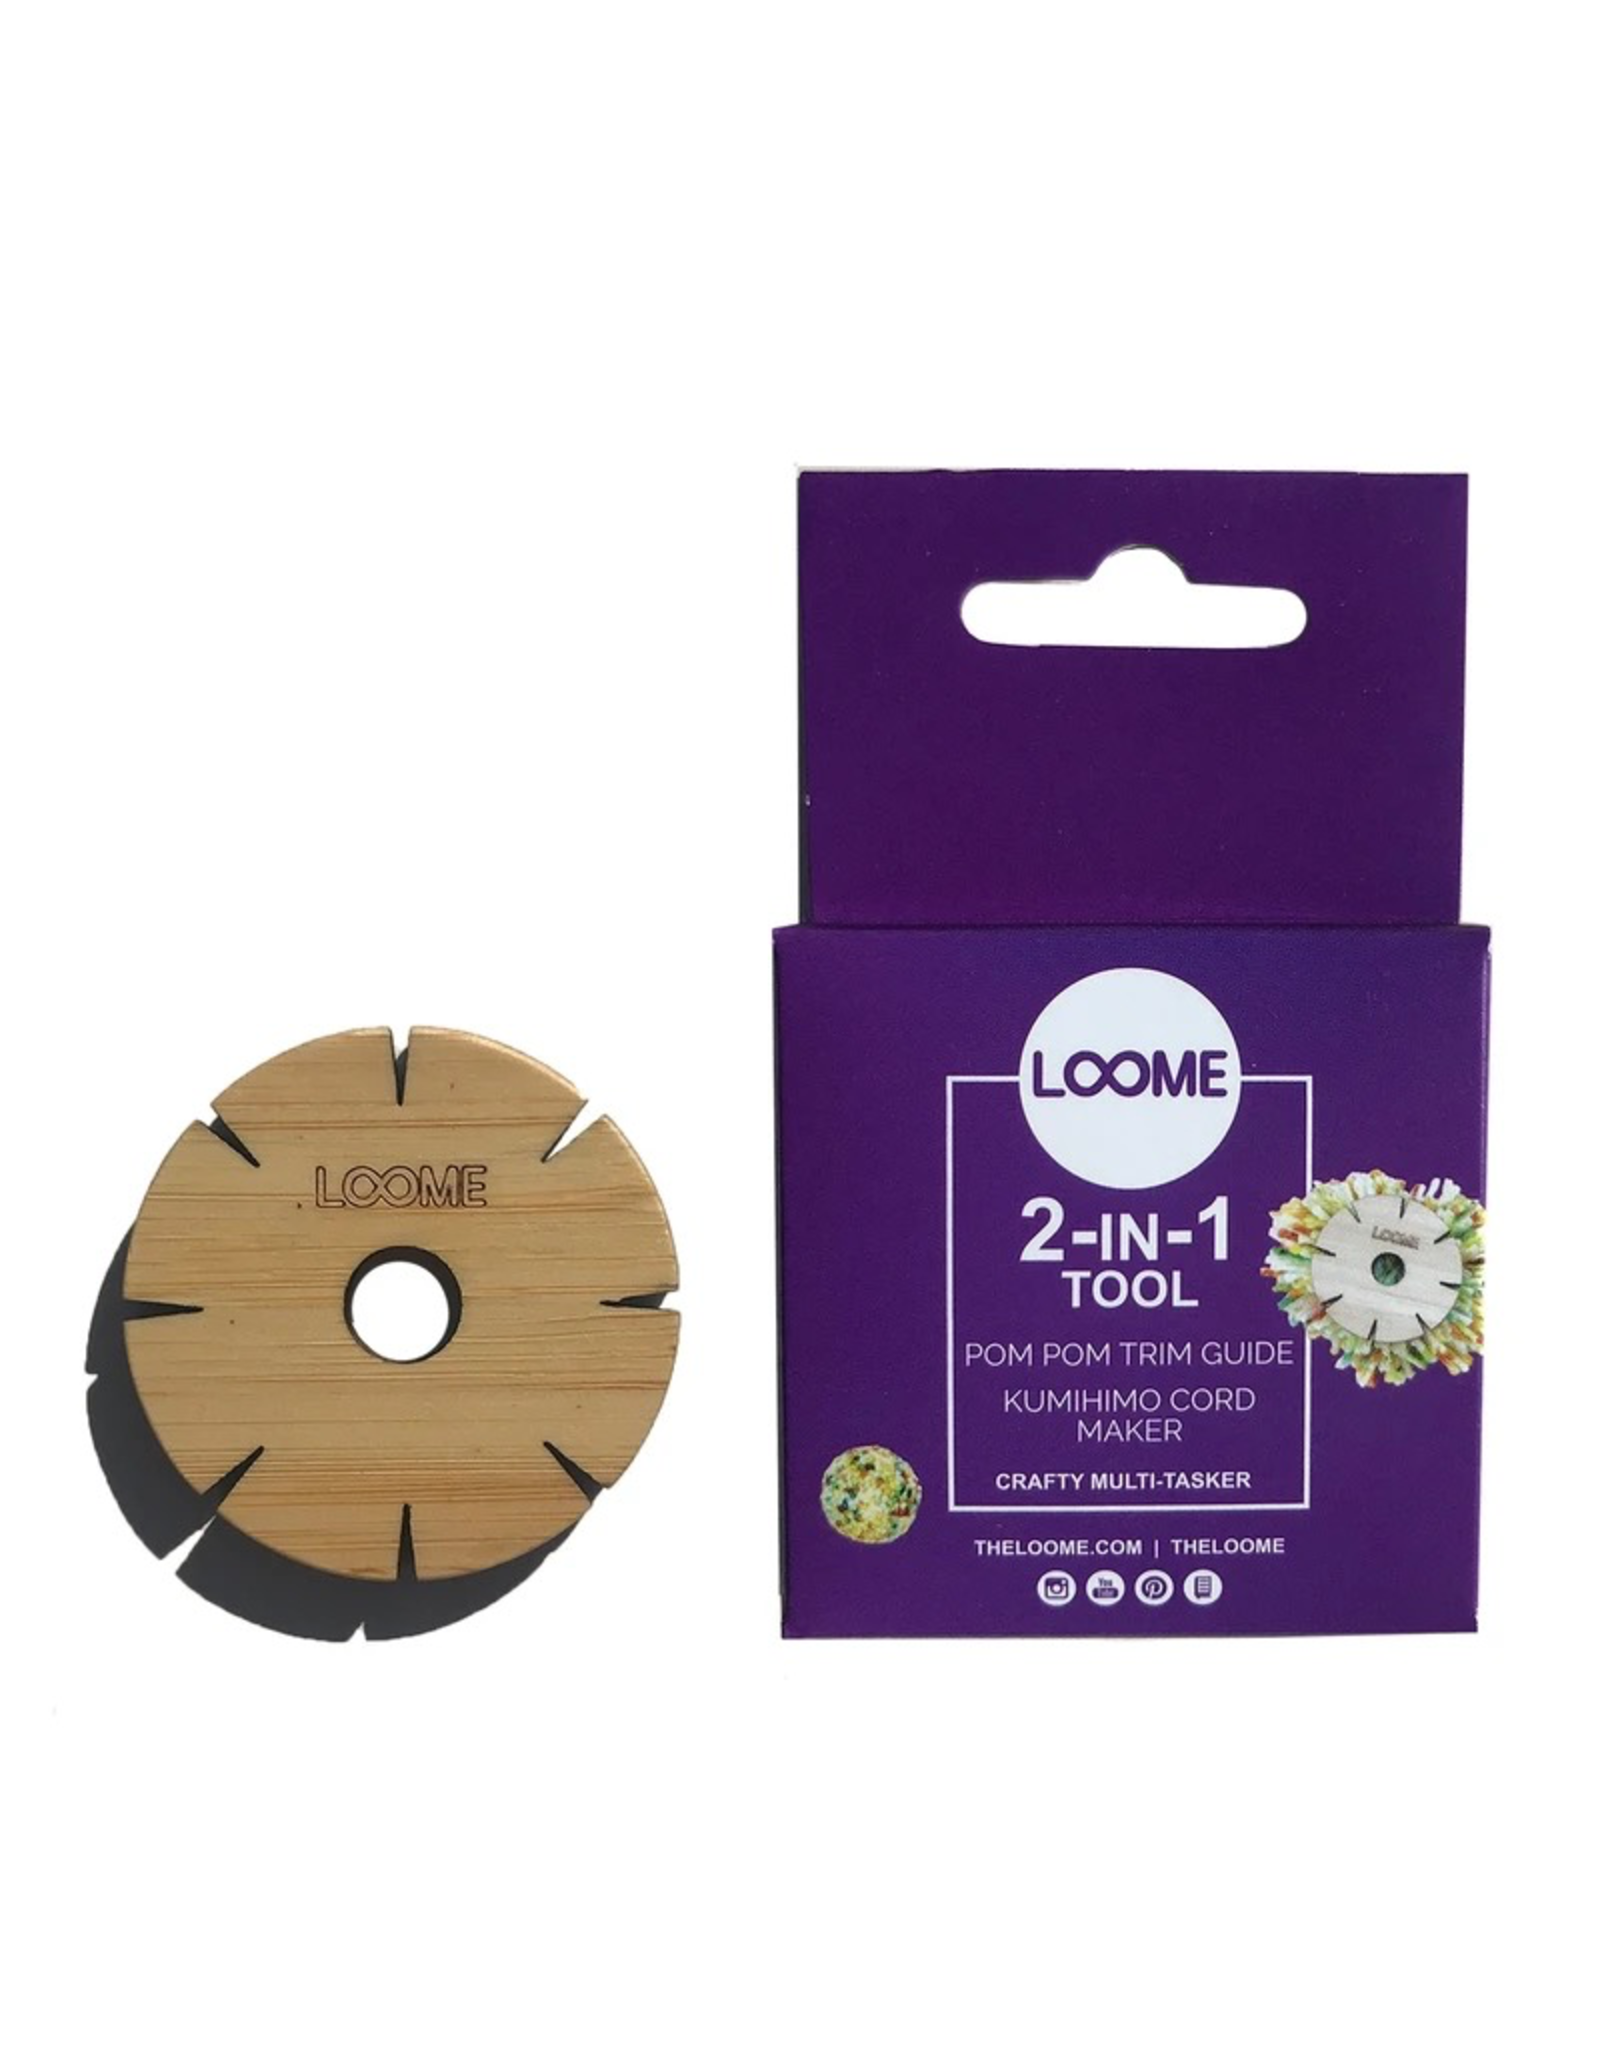 Loome The Loome 2-In-1 Tool: Pom Pom Trim Guide & Kumihimo Cord Maker